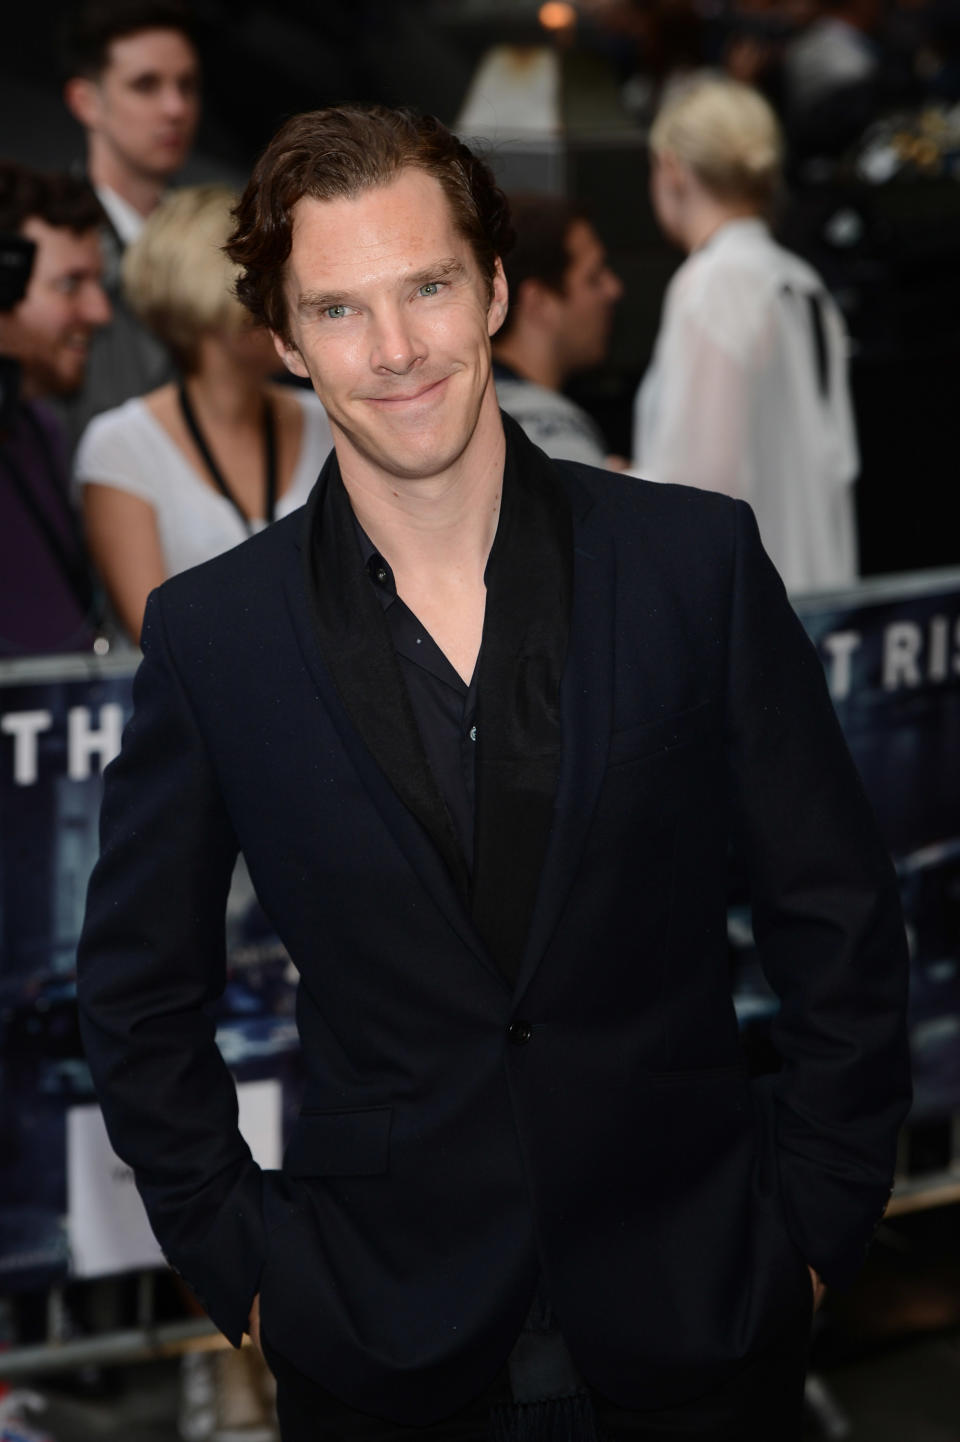 LONDON, ENGLAND - JULY 18: Benedict Cumberbatch attends European premiere of "The Dark Knight Rises" at Odeon Leicester Square on July 18, 2012 in London, England. (Photo by Ian Gavan/Getty Images)